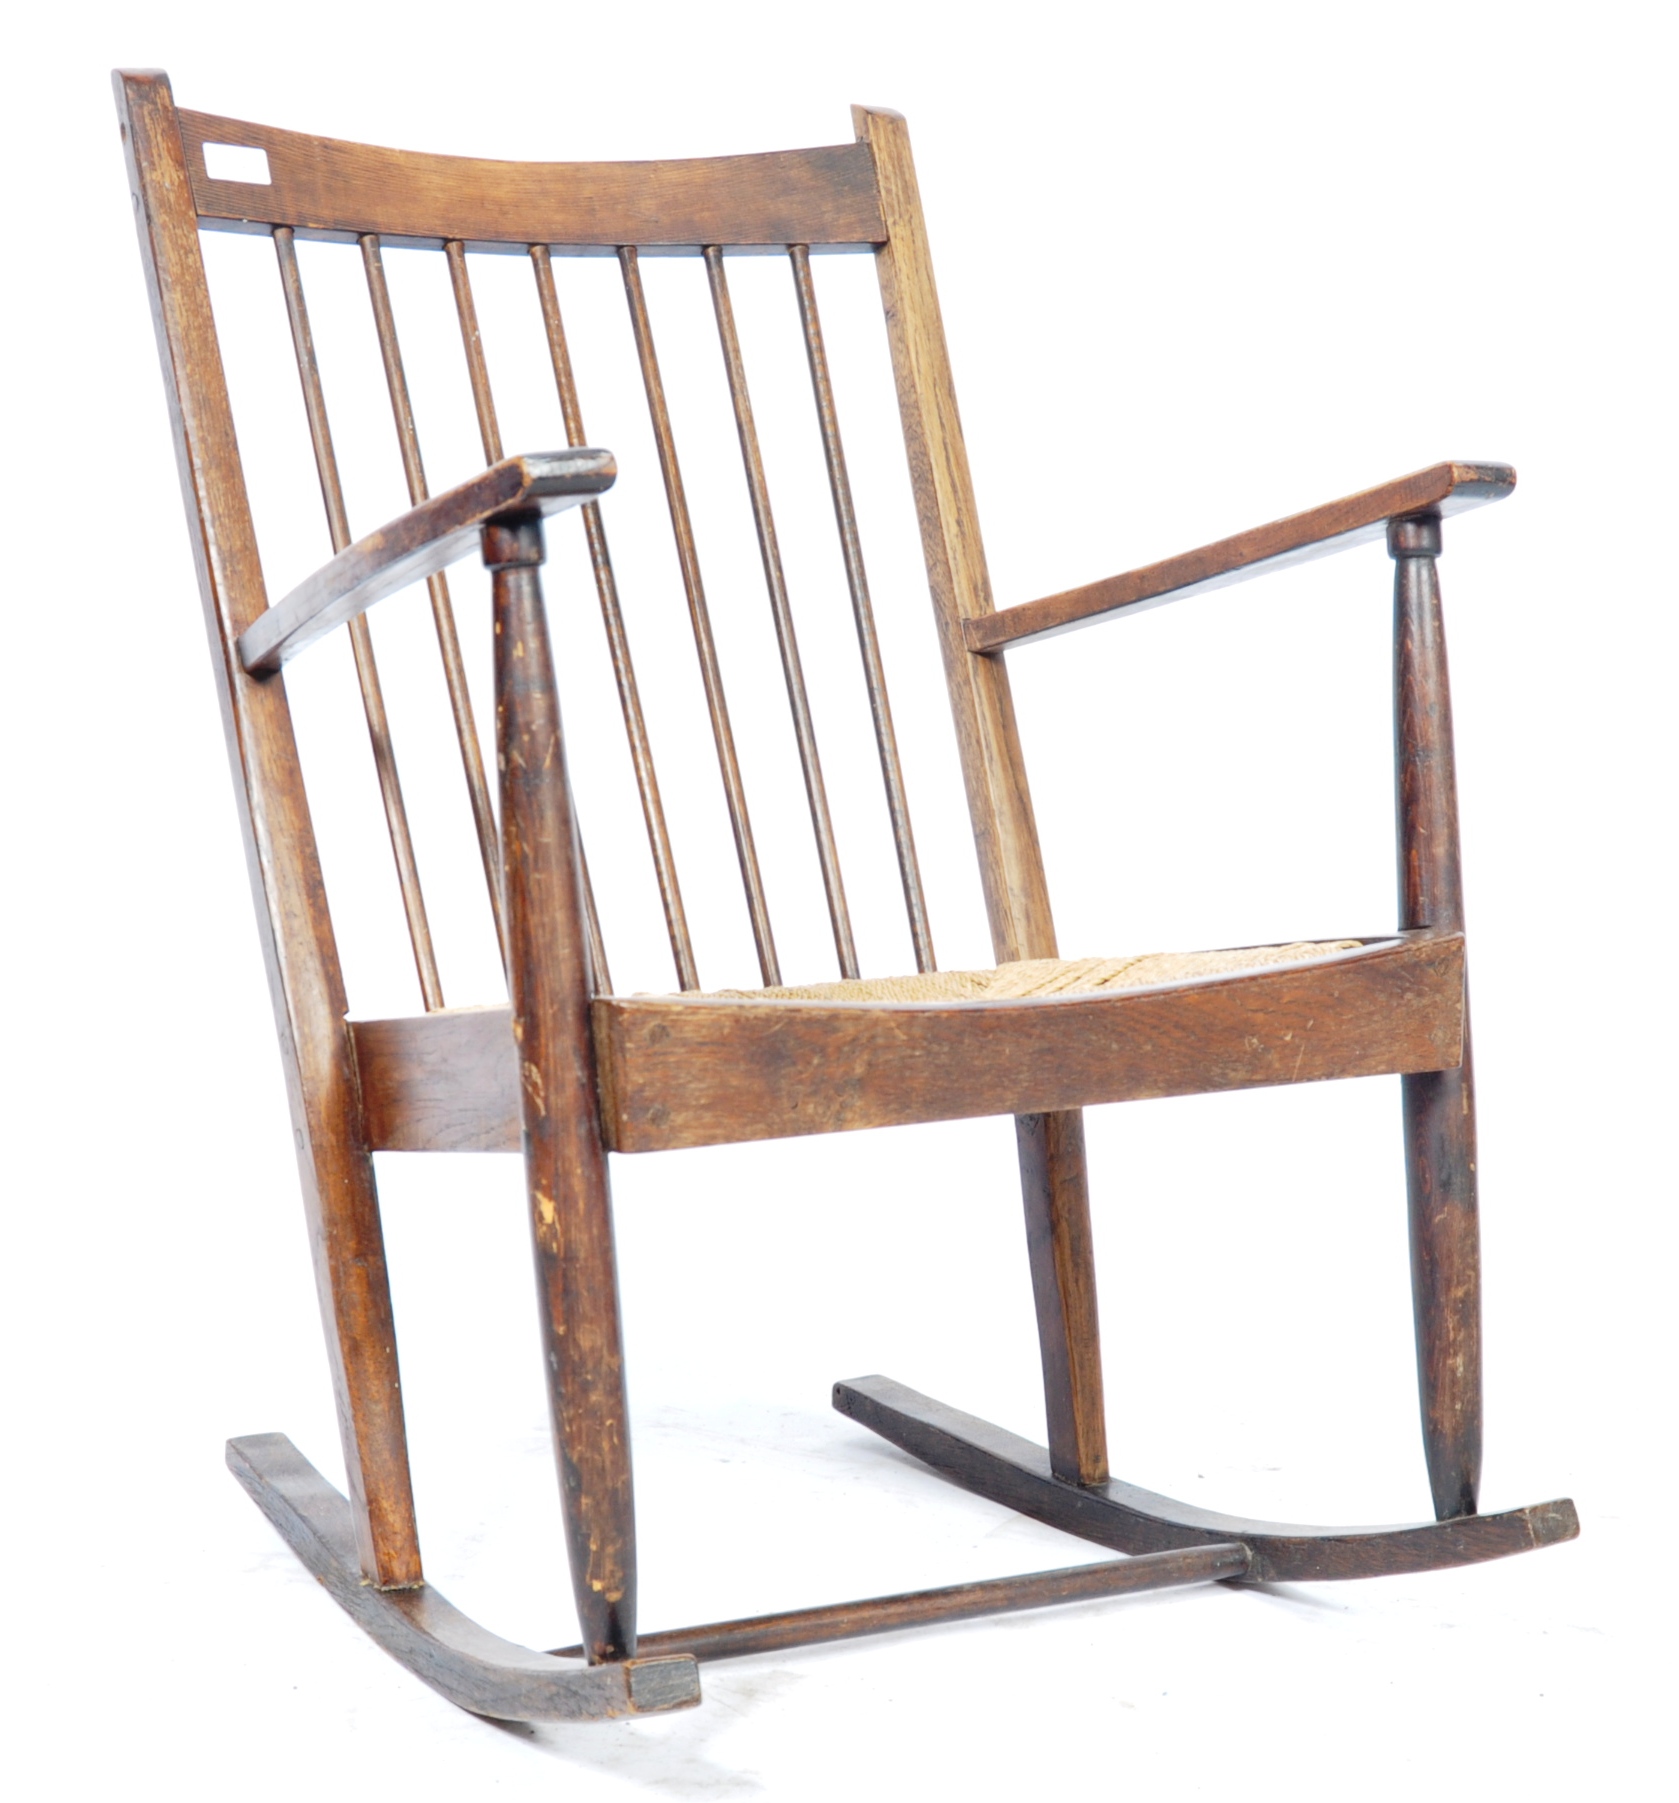 EARLY TO MID 20TH CENTURY BESPOKE MADE OAK ROCKING CHAIR